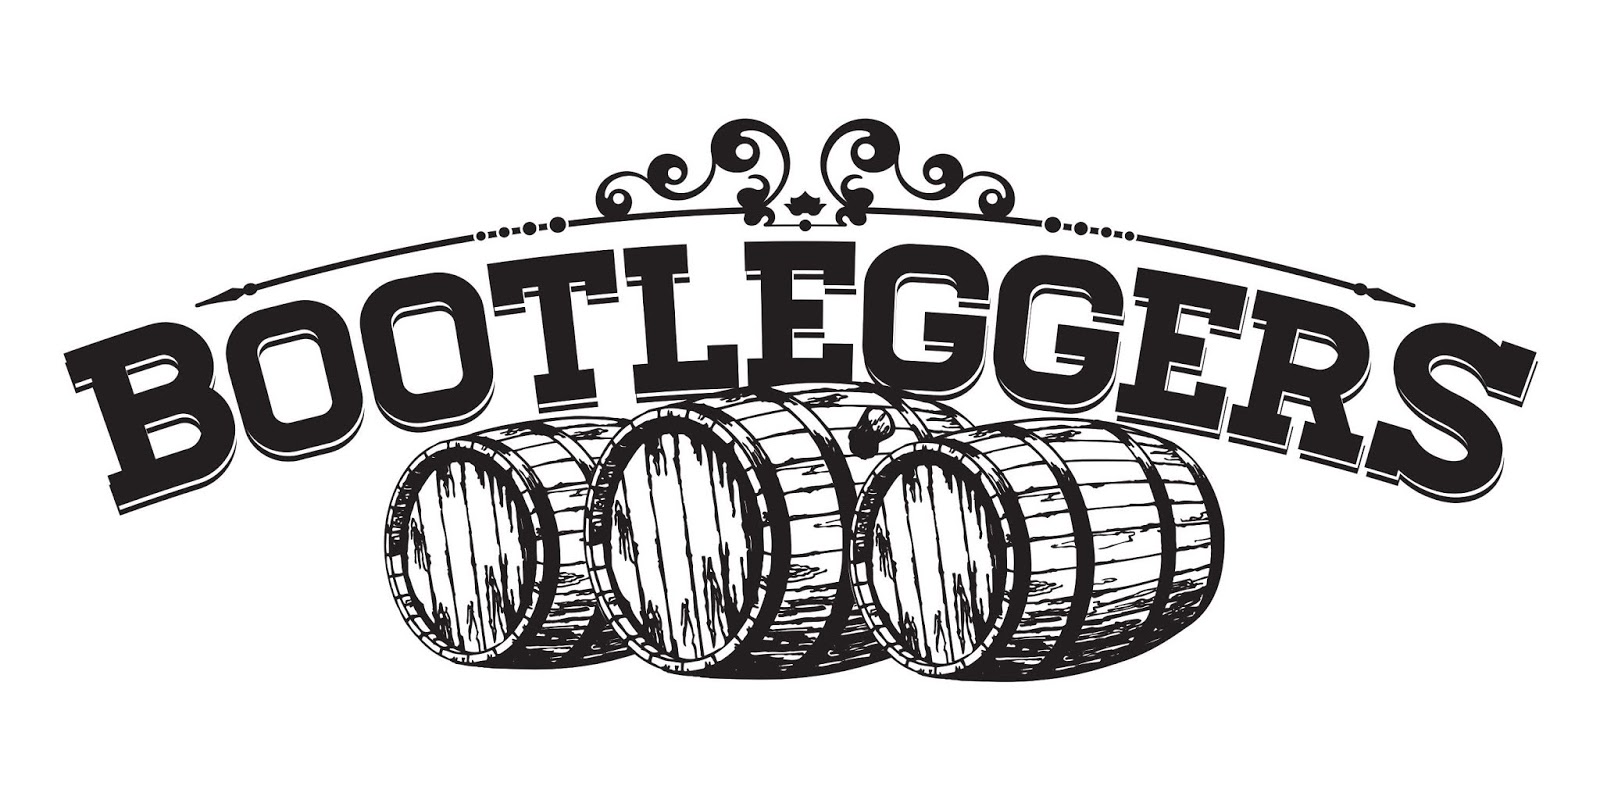 Family Ties and Connections: The Bootlegger from Oklahoma